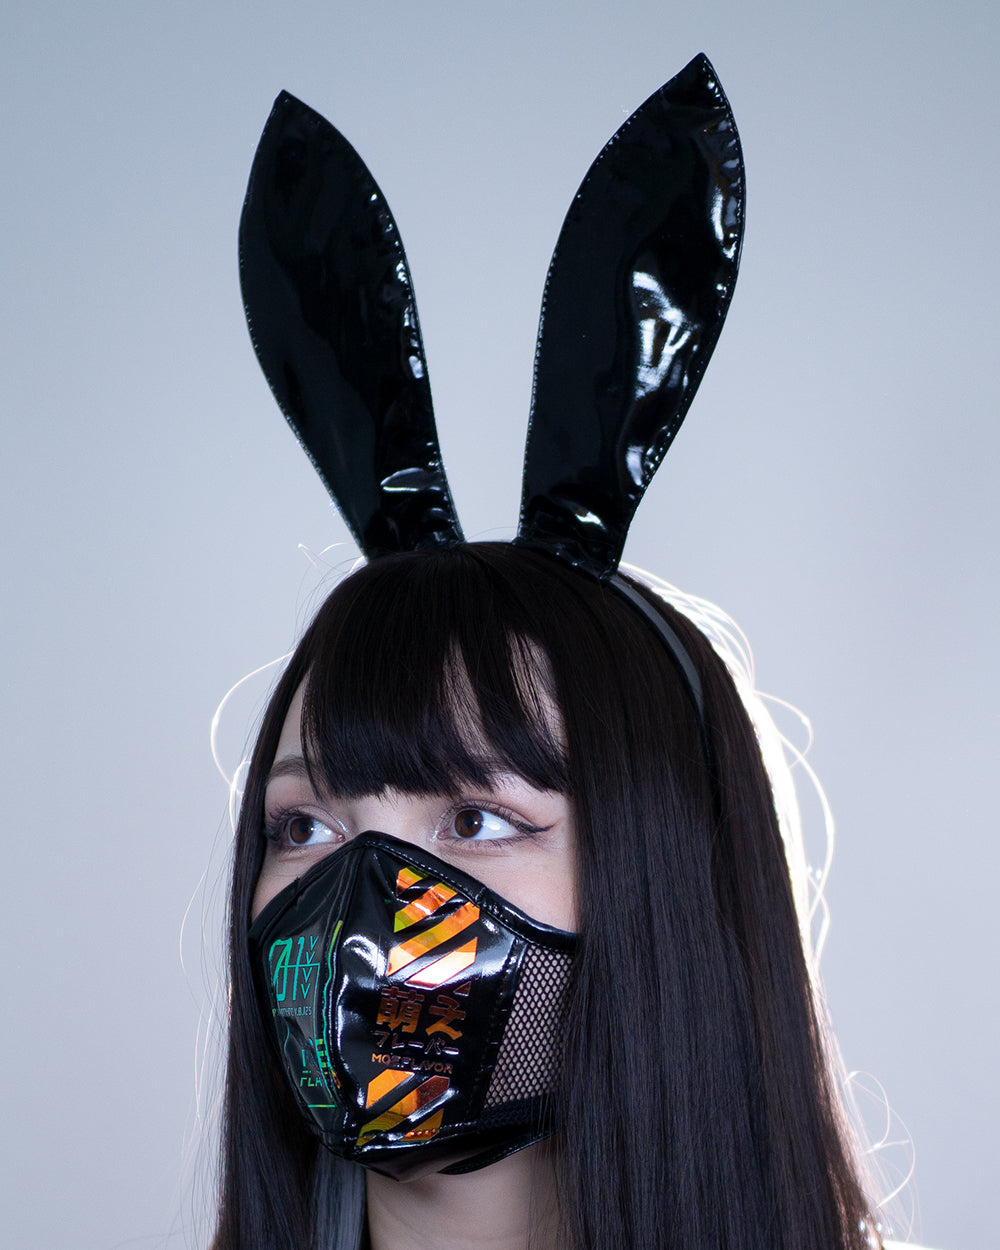 cyber-bunny-cyberpunk-mask-white-black-holographic-4 MOEFLAVOR - Waifu Inspired Fashion and Lingerie Store